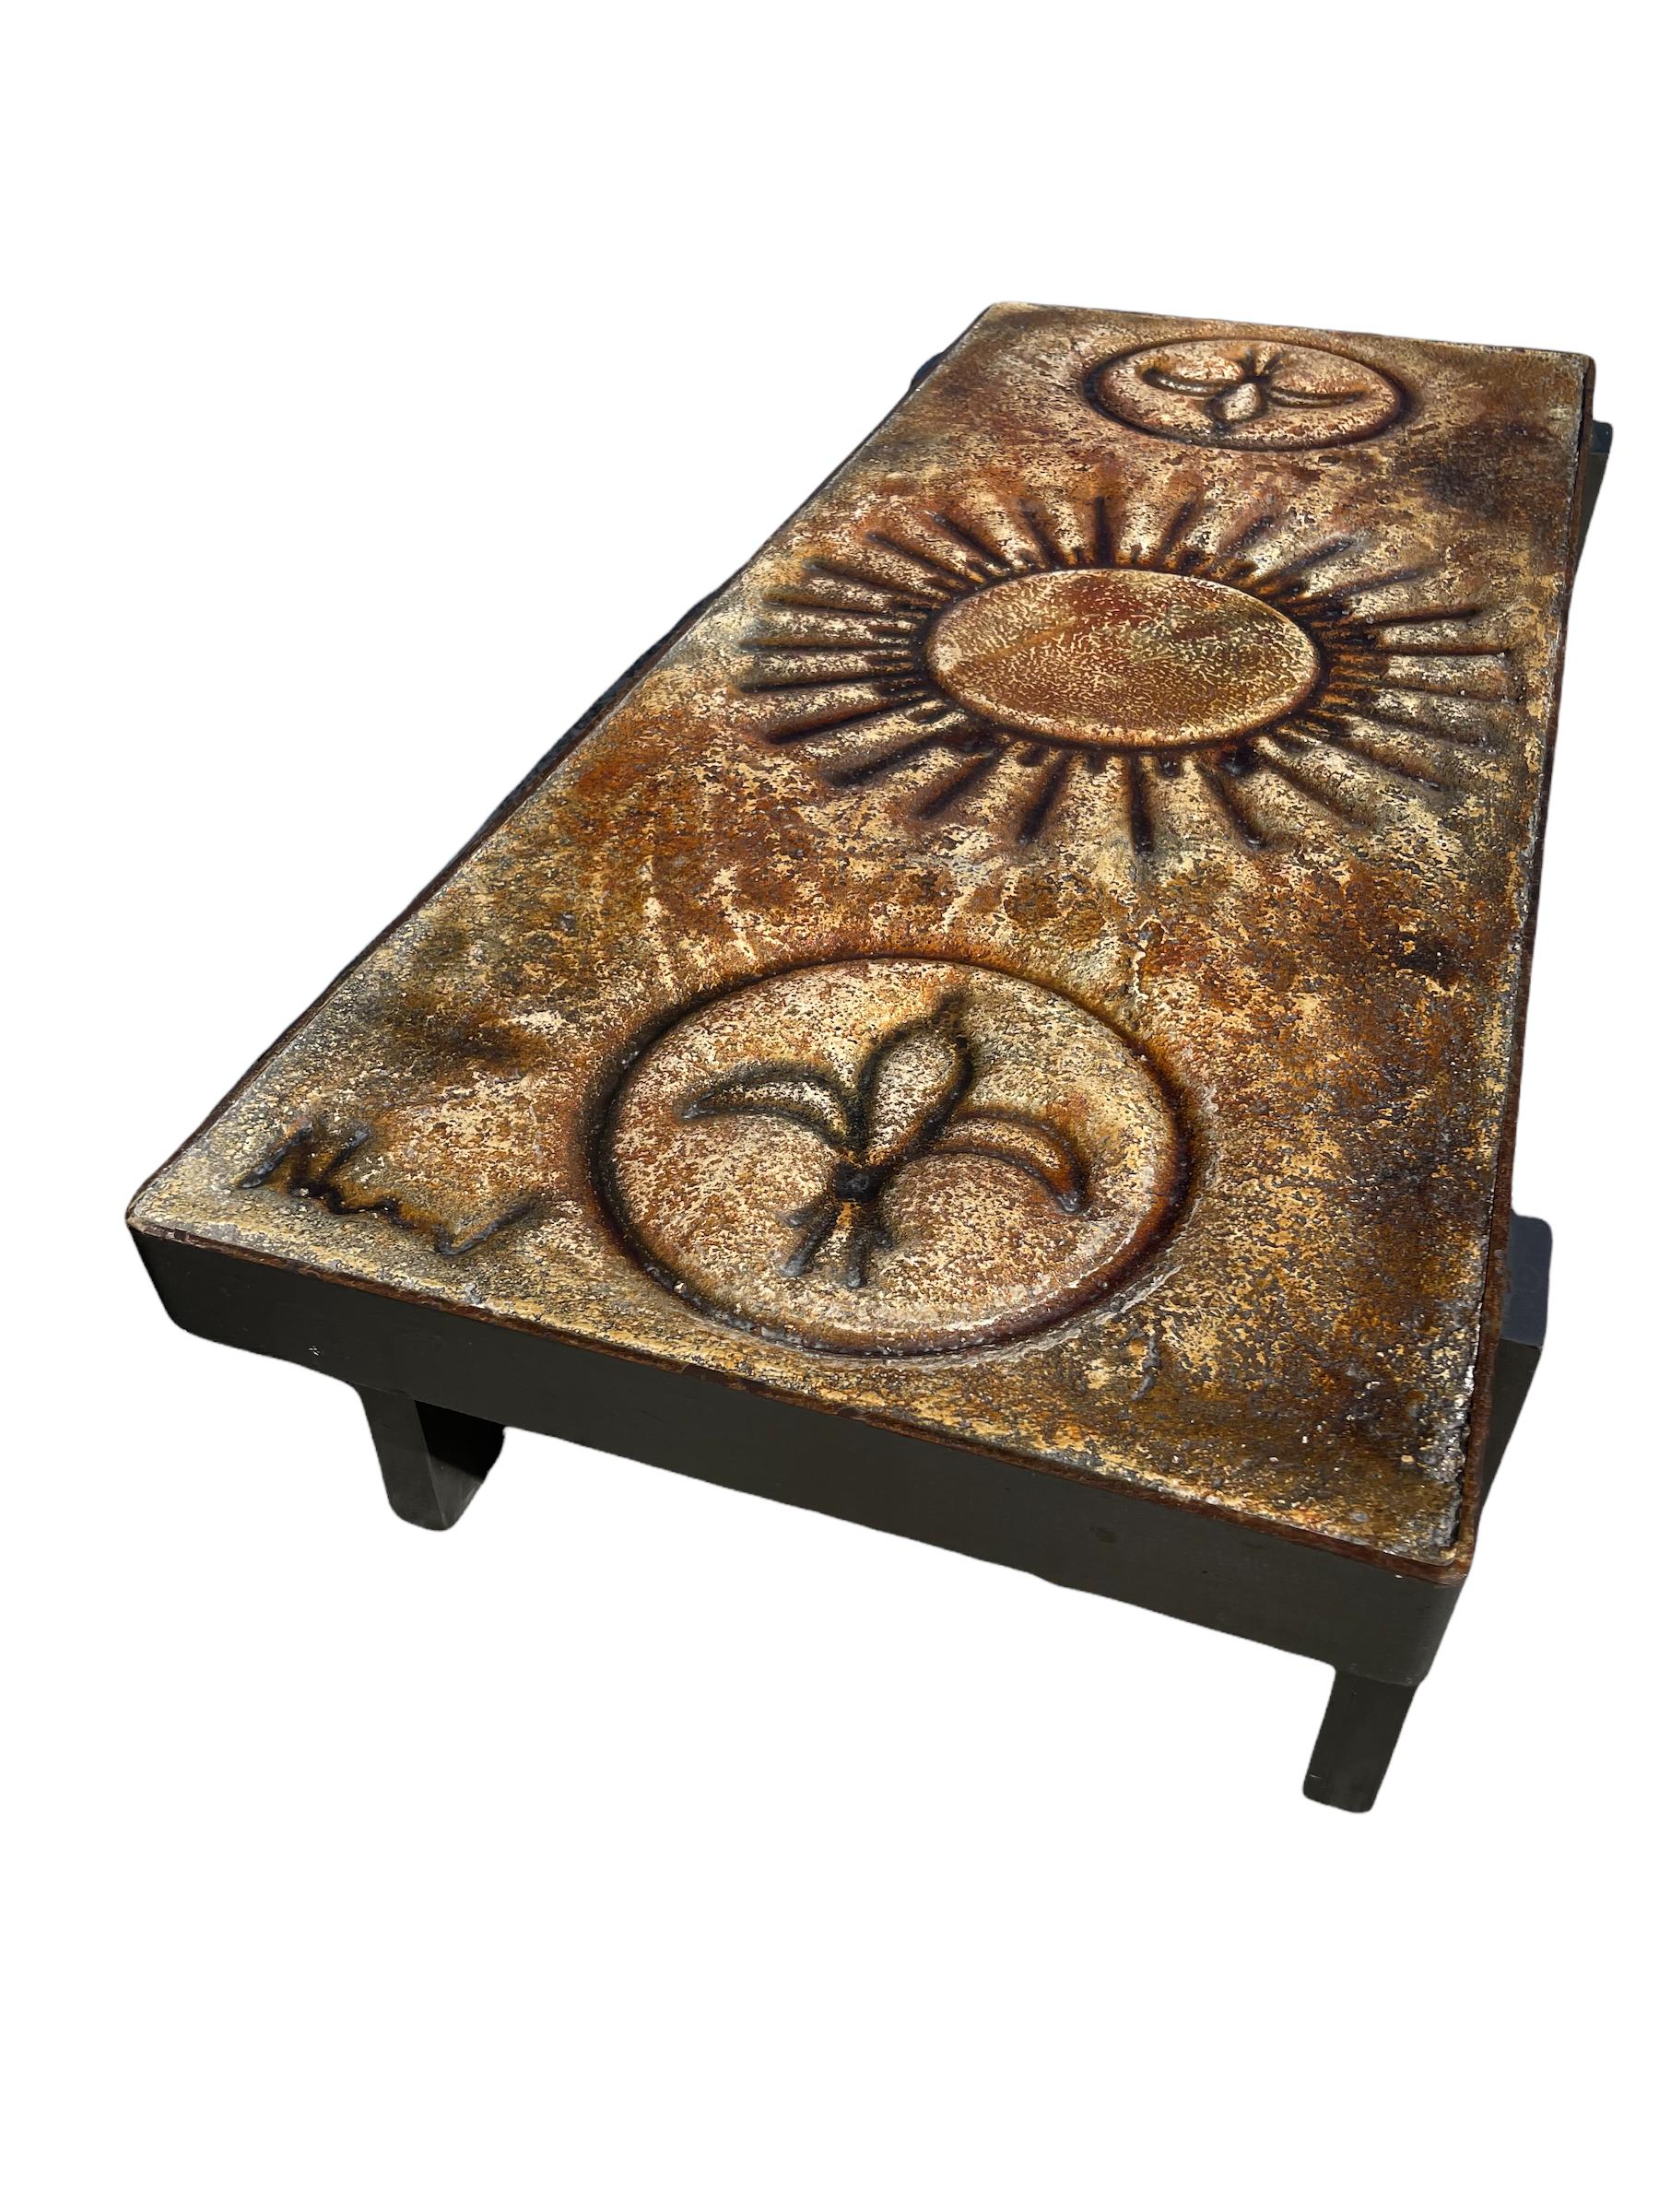 Hand-Crafted French Pierre De Lave Ceramic Francois Chaty for Vallauris Coffee Table